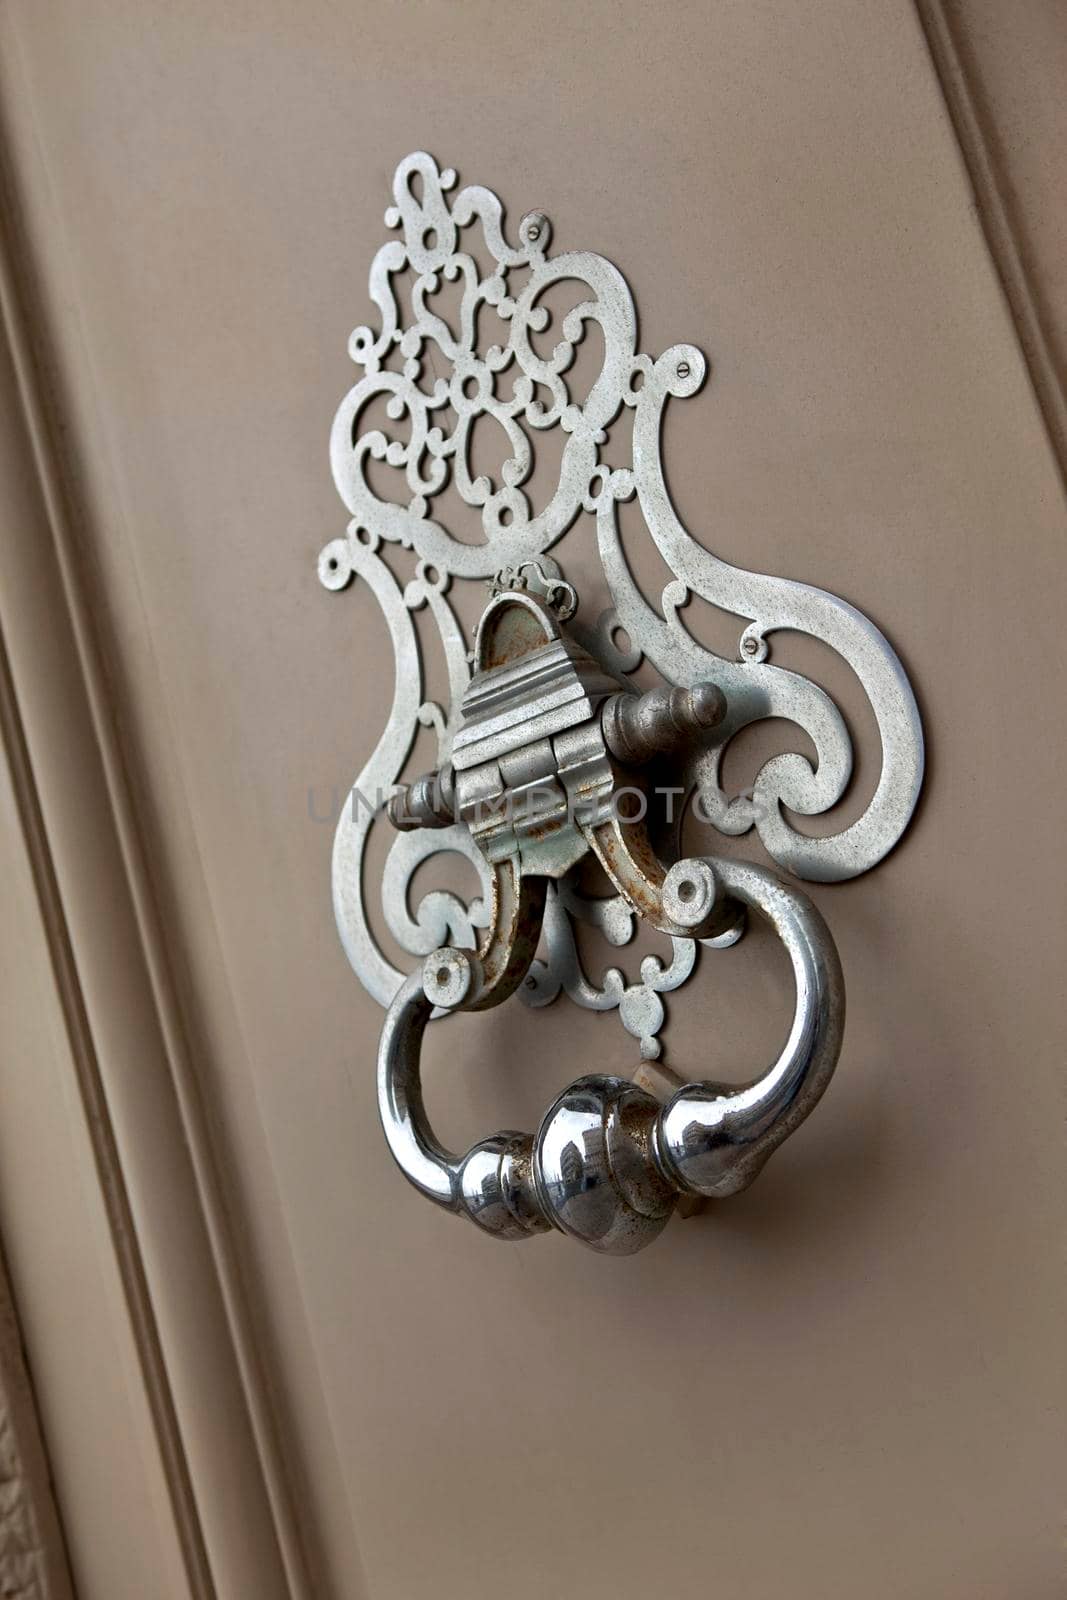 Bronze knocker on the door of a French mansion